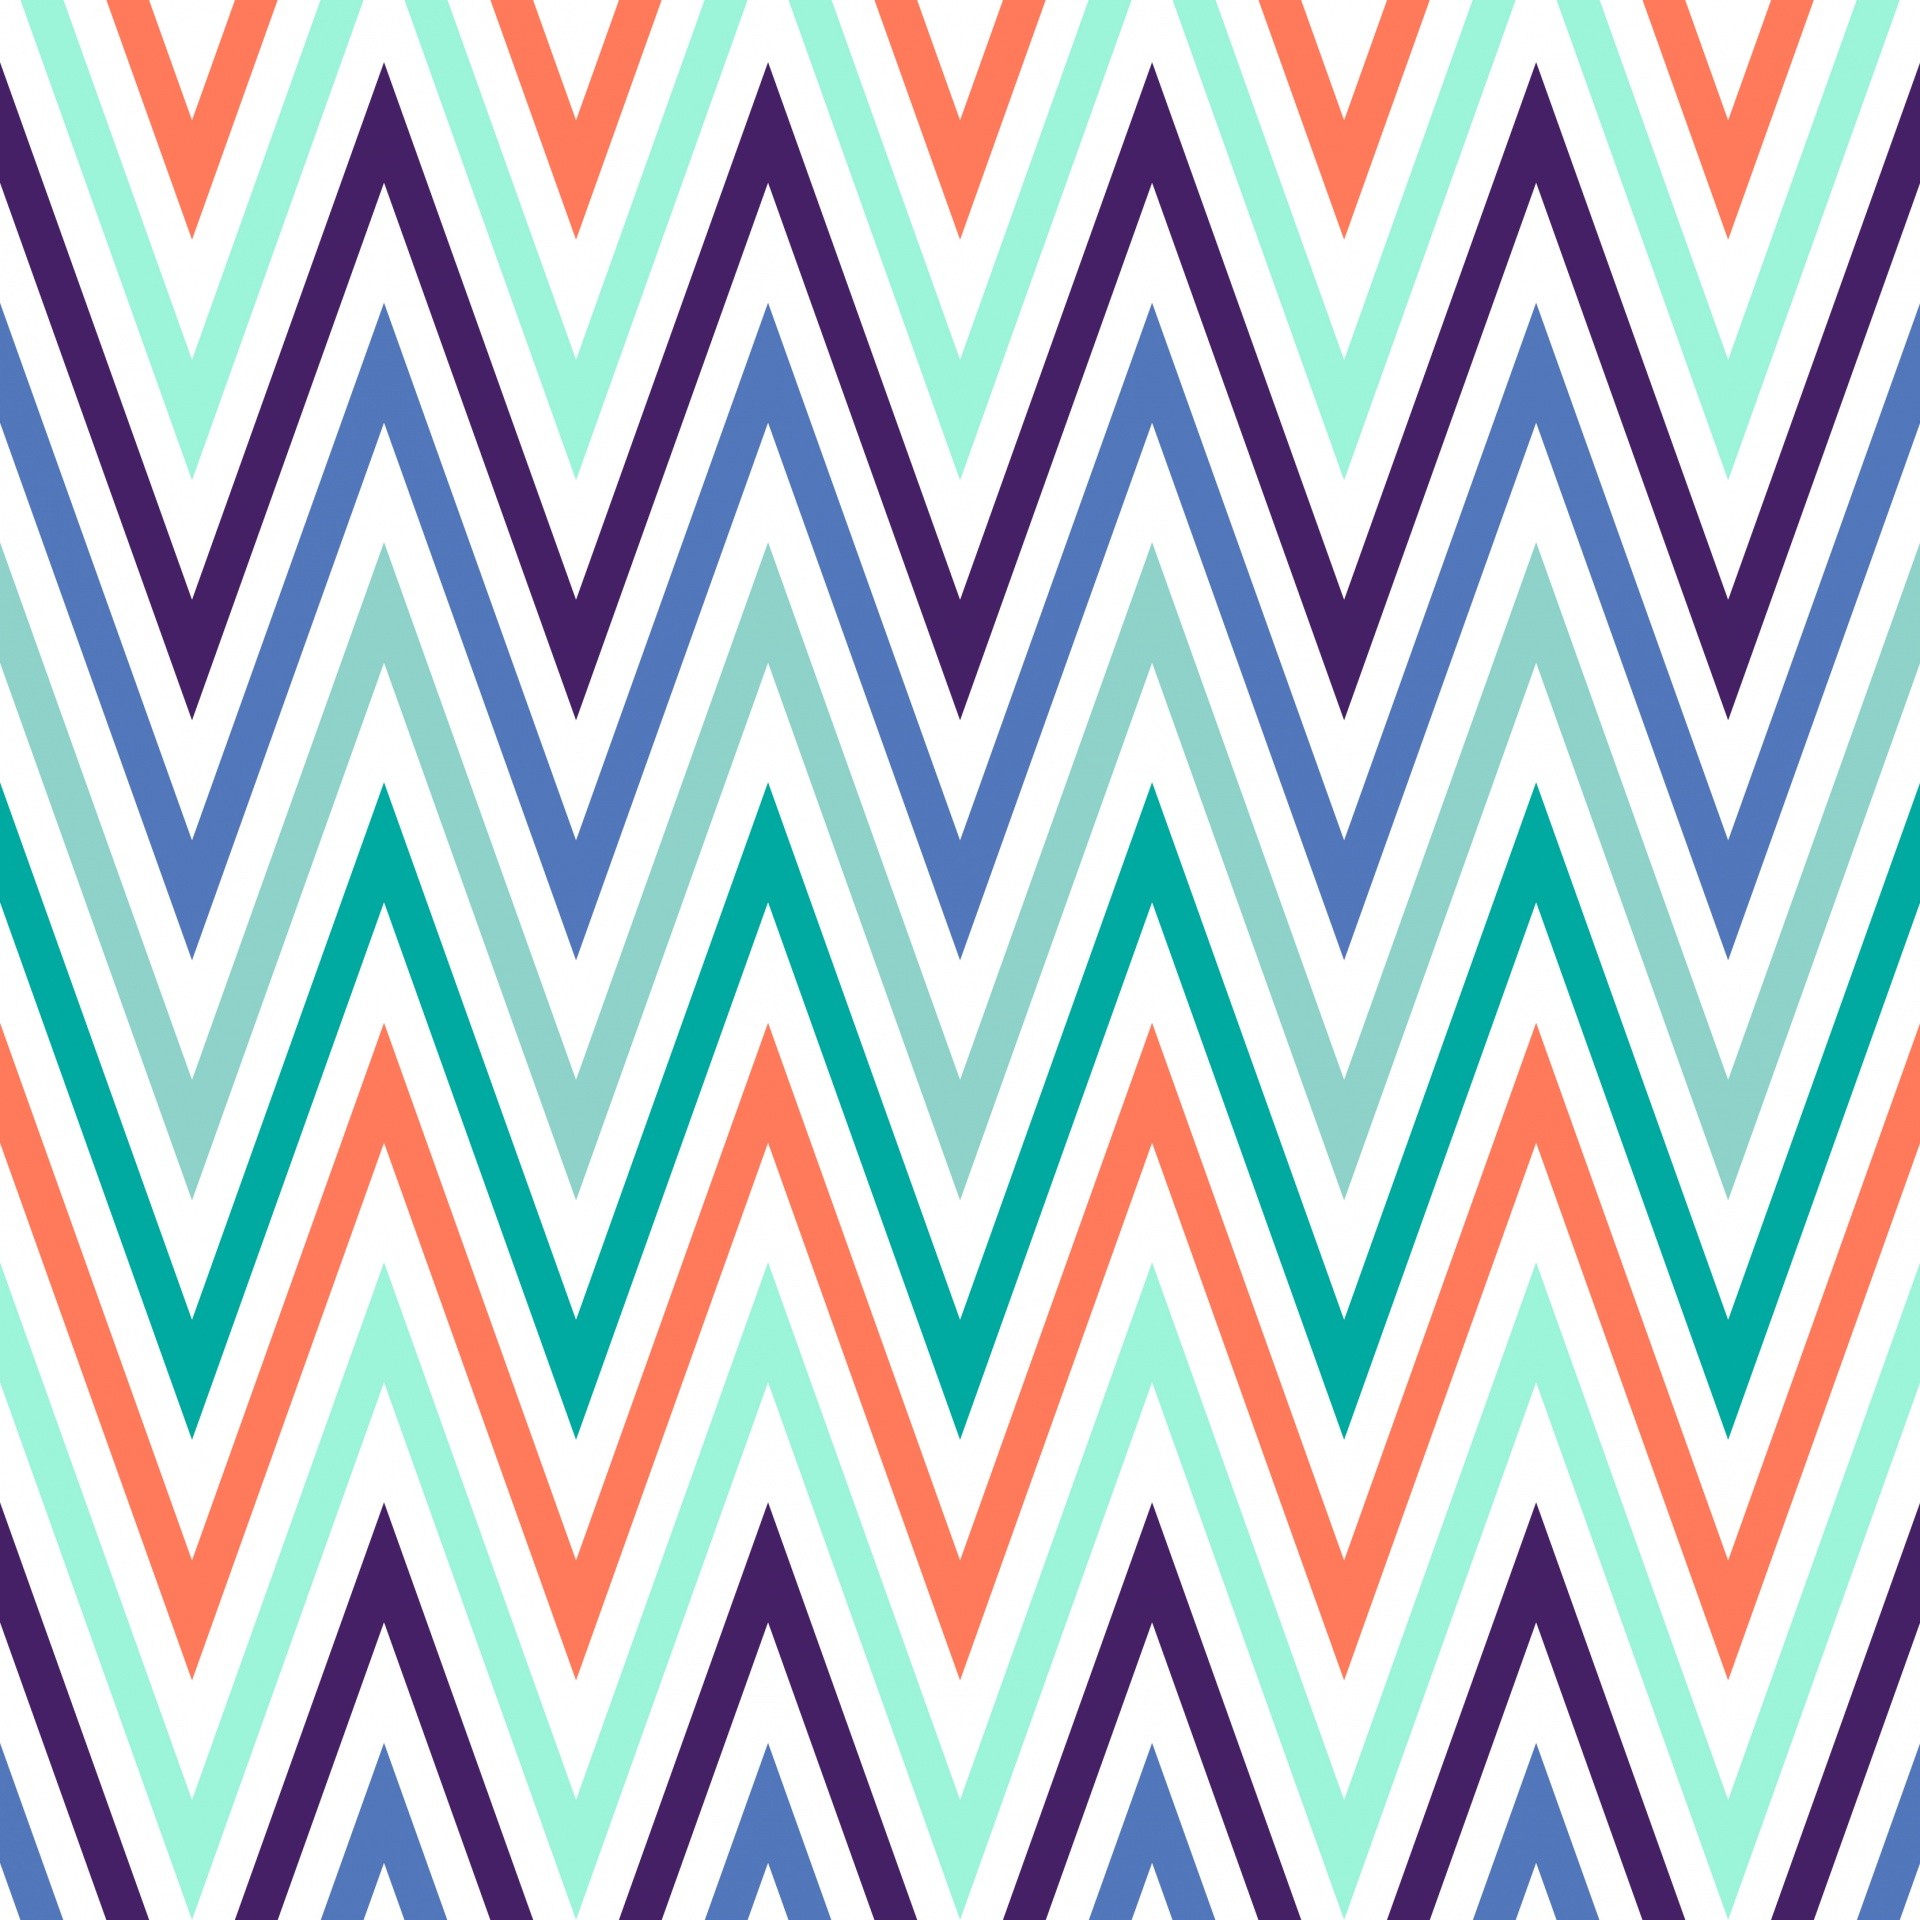 1920x1920 Chevrons Colourful Background